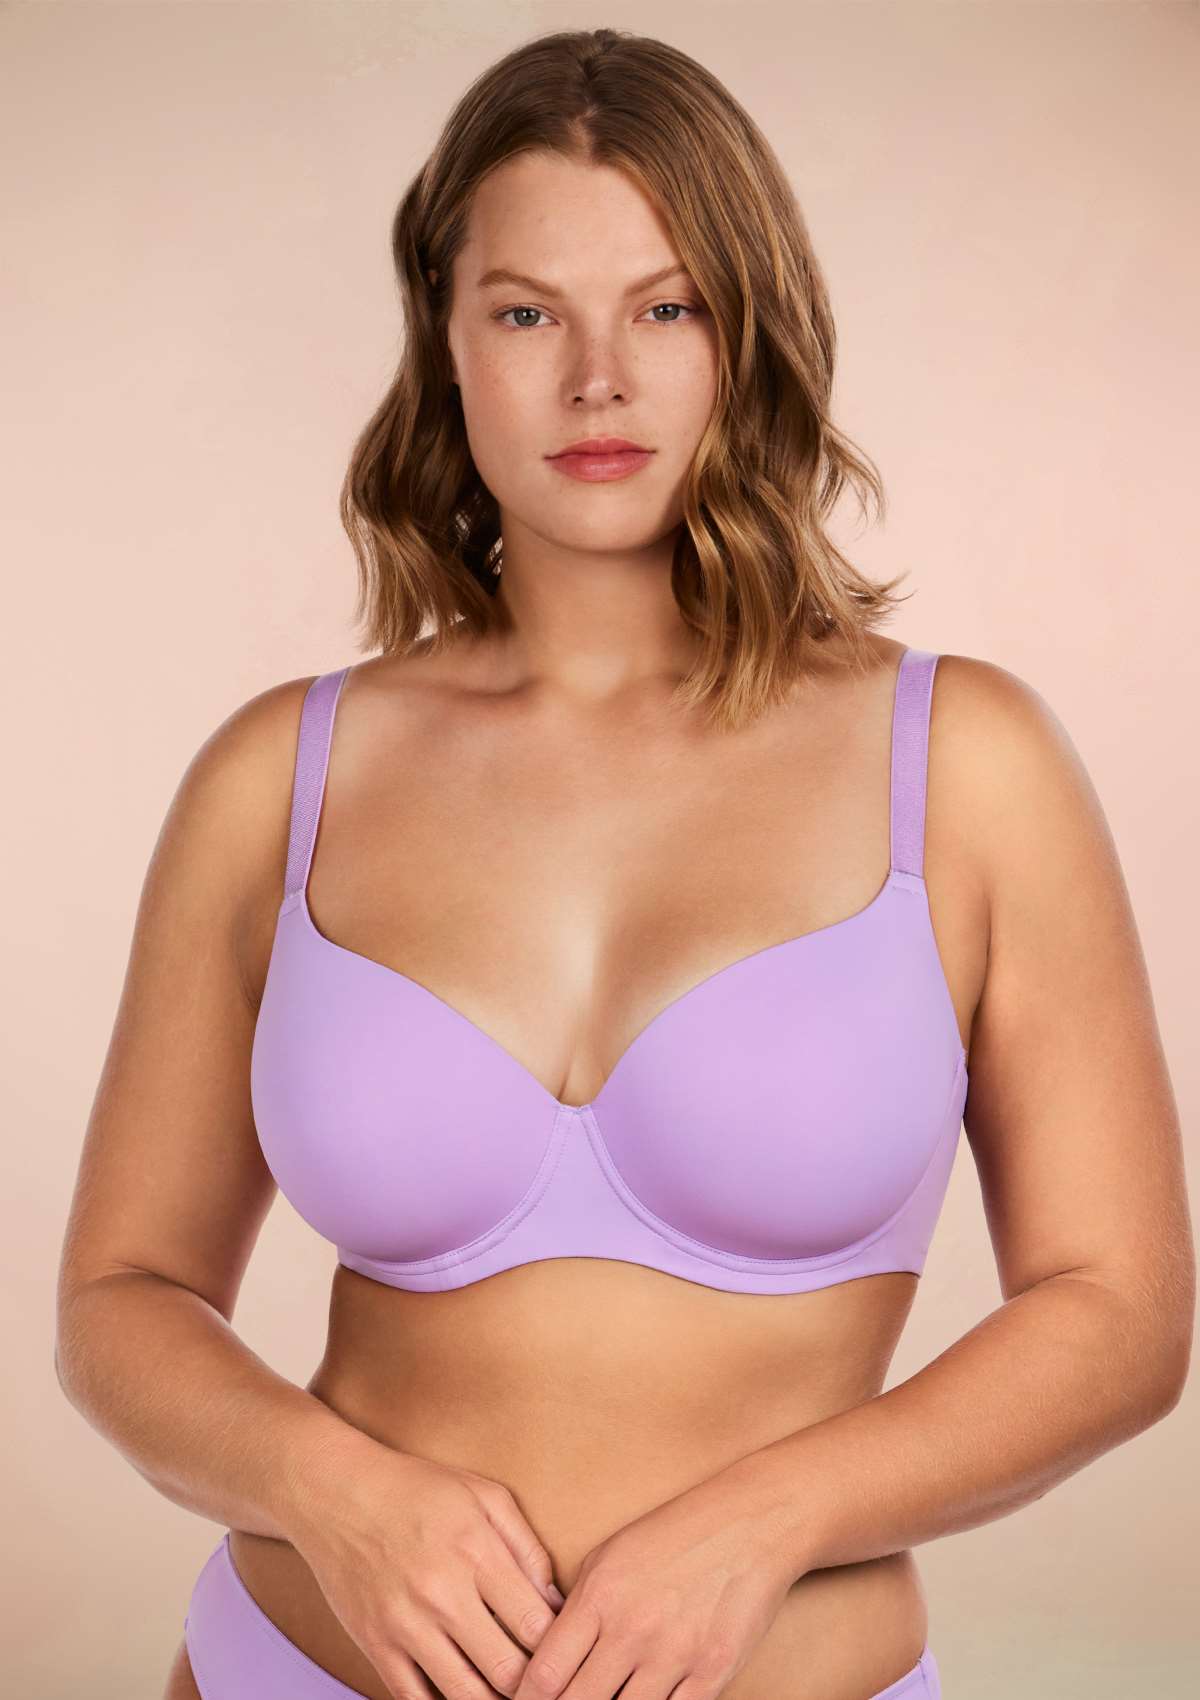 HSIA Gemma Smooth Lightly Padded T-shirt Bra For Heavy Breasts - Pink / 42 / C